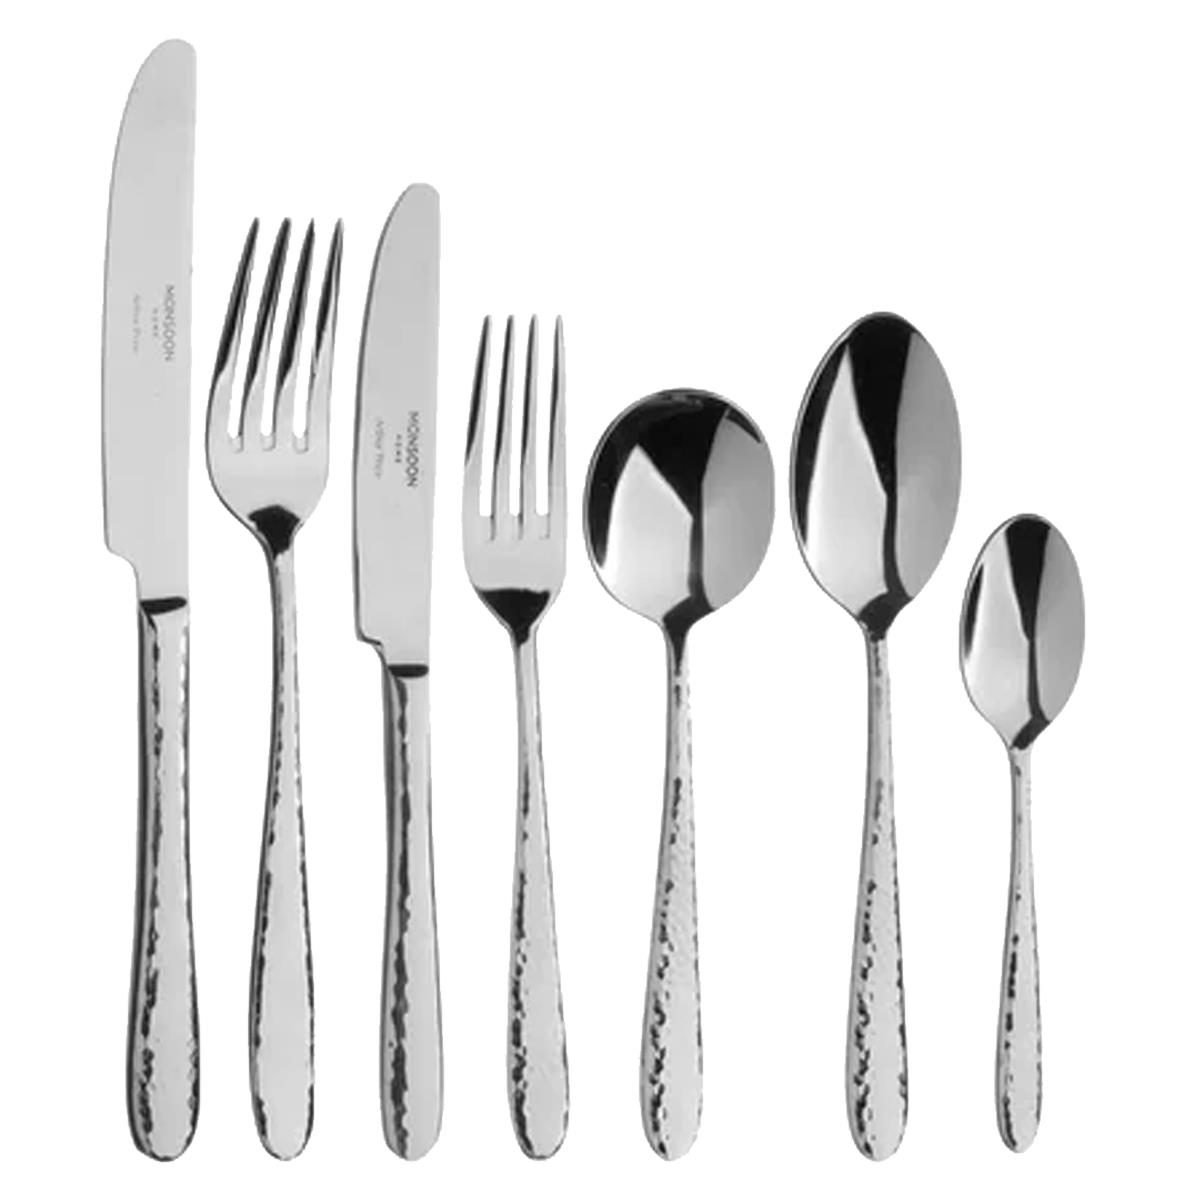 Arthur Price Monsoon Mirage Design Cutlery Questions & Answers